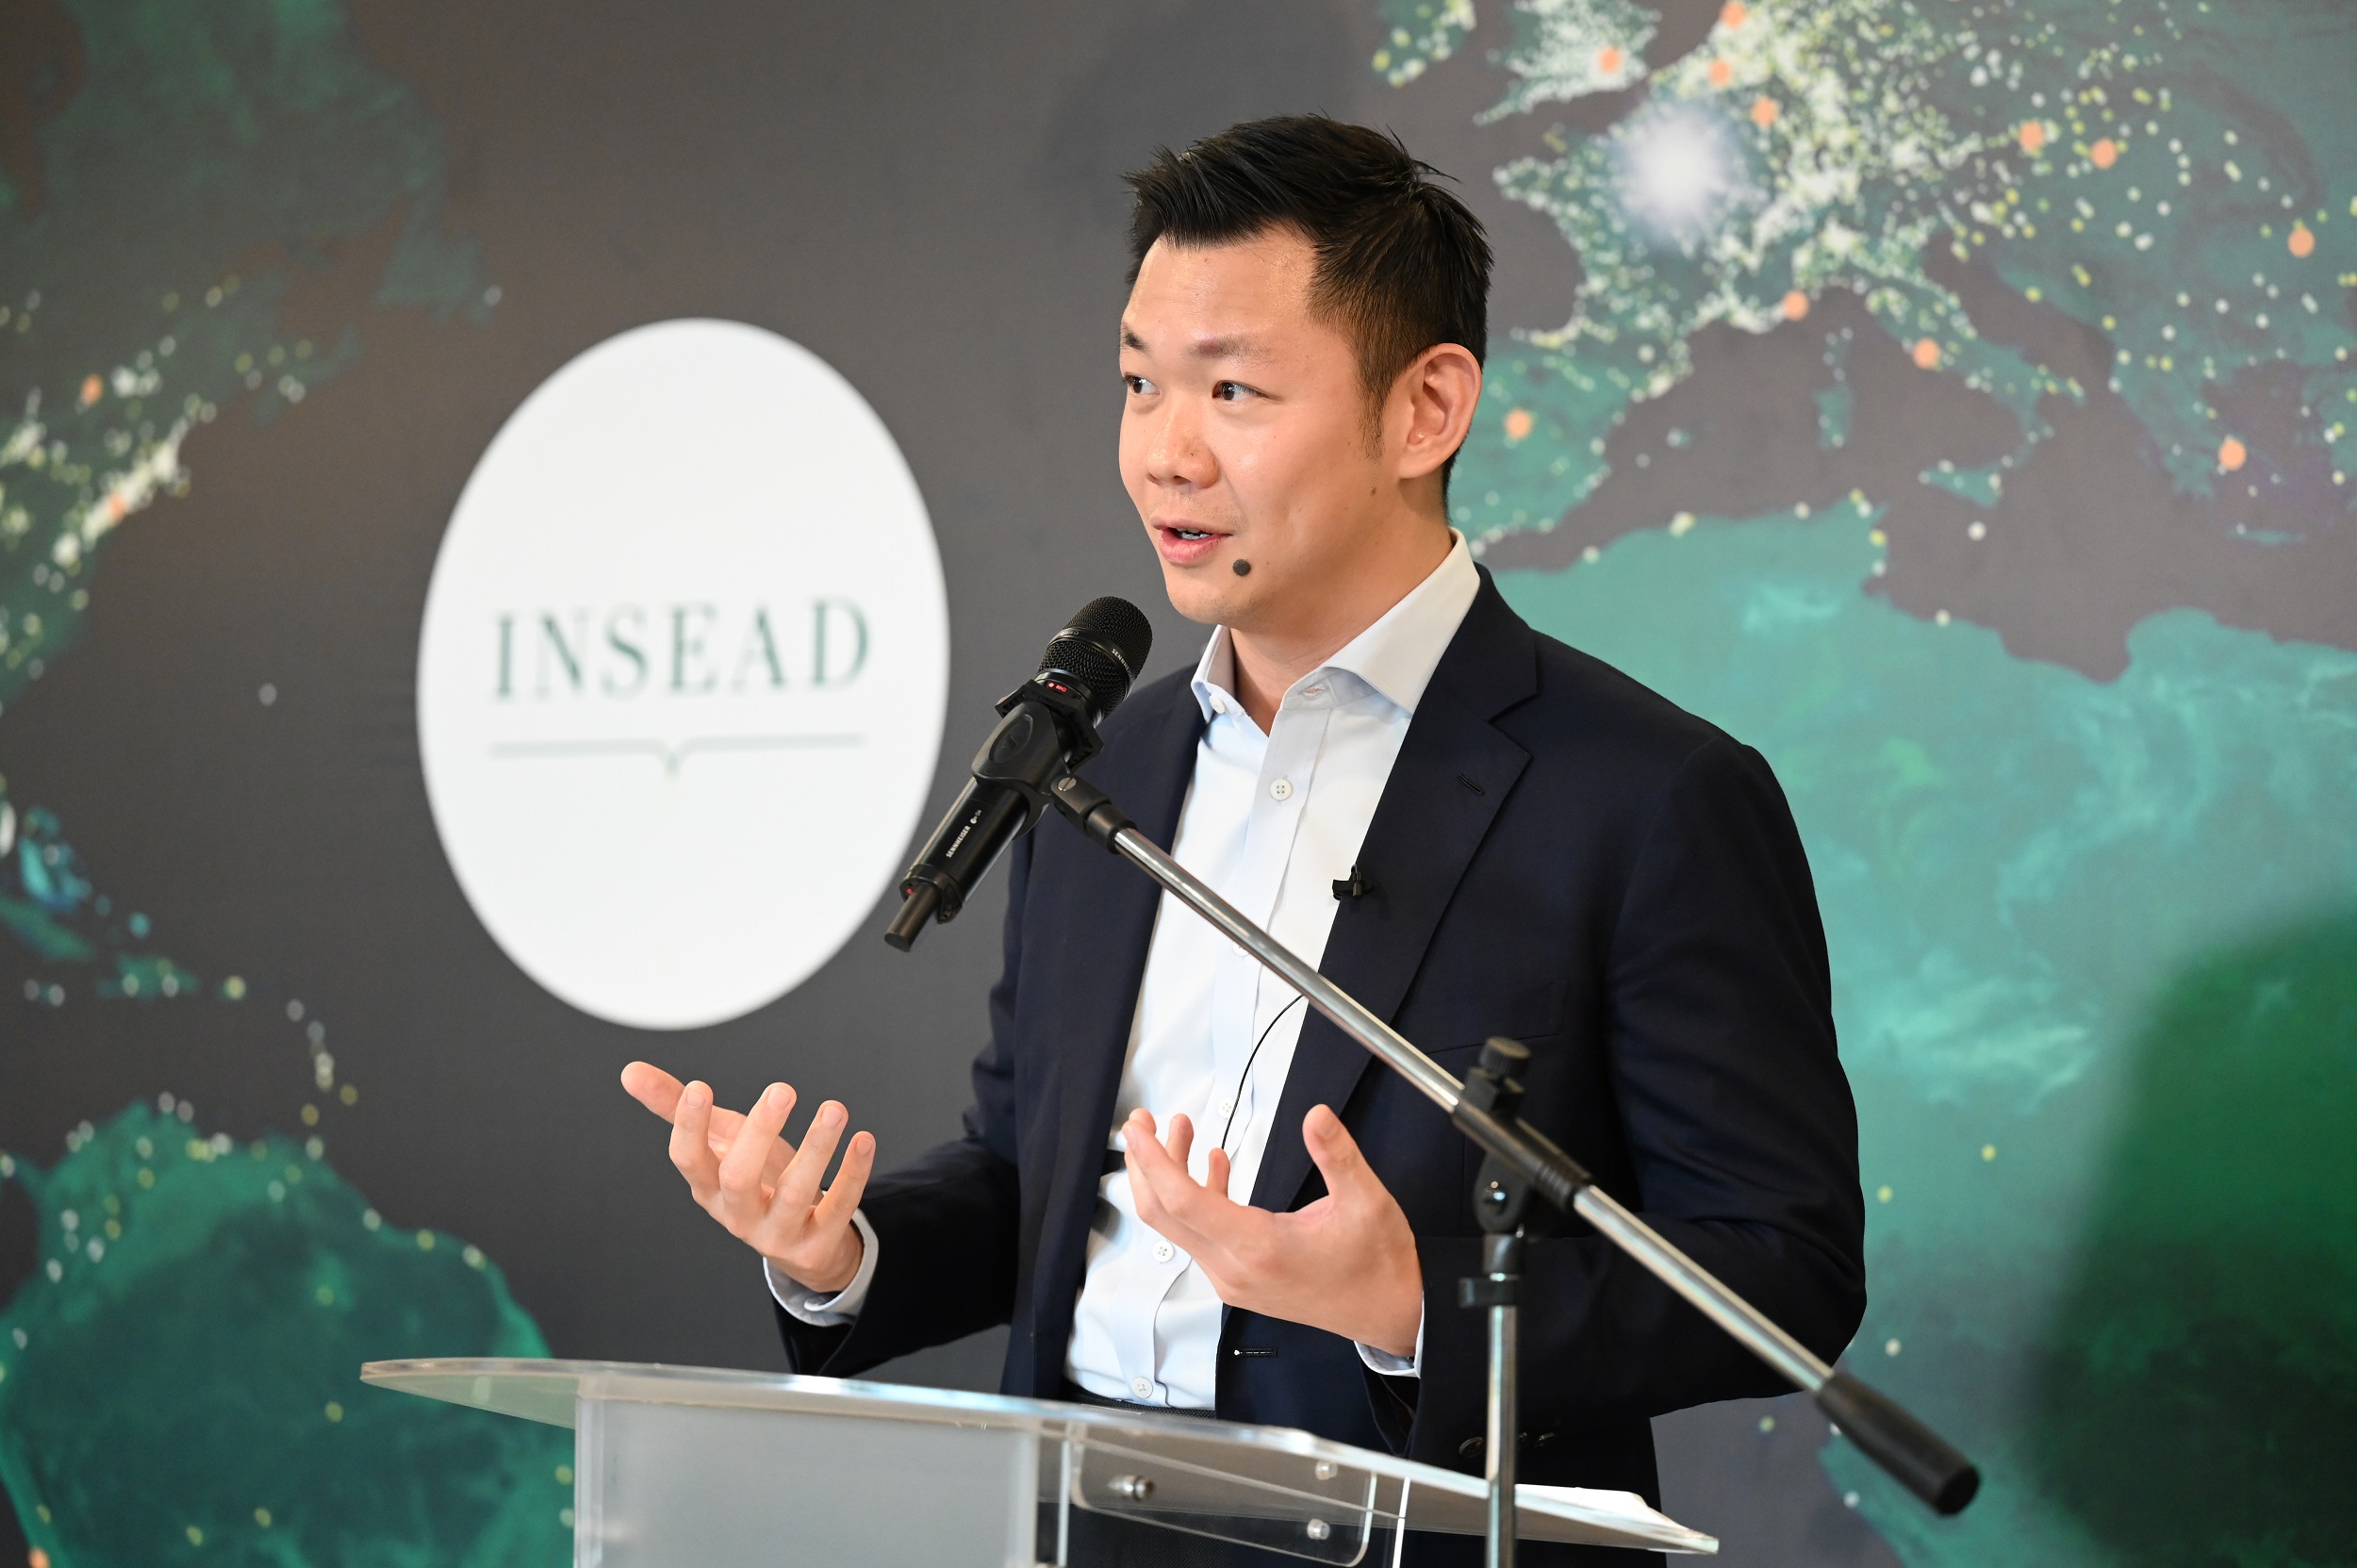 Mr Anderson Tanoto, Member of the Board of Trustees, Tanoto Foundation, speaks at the inauguration of the Tanoto Research and Learning Hub, INSEAD Asia Campus